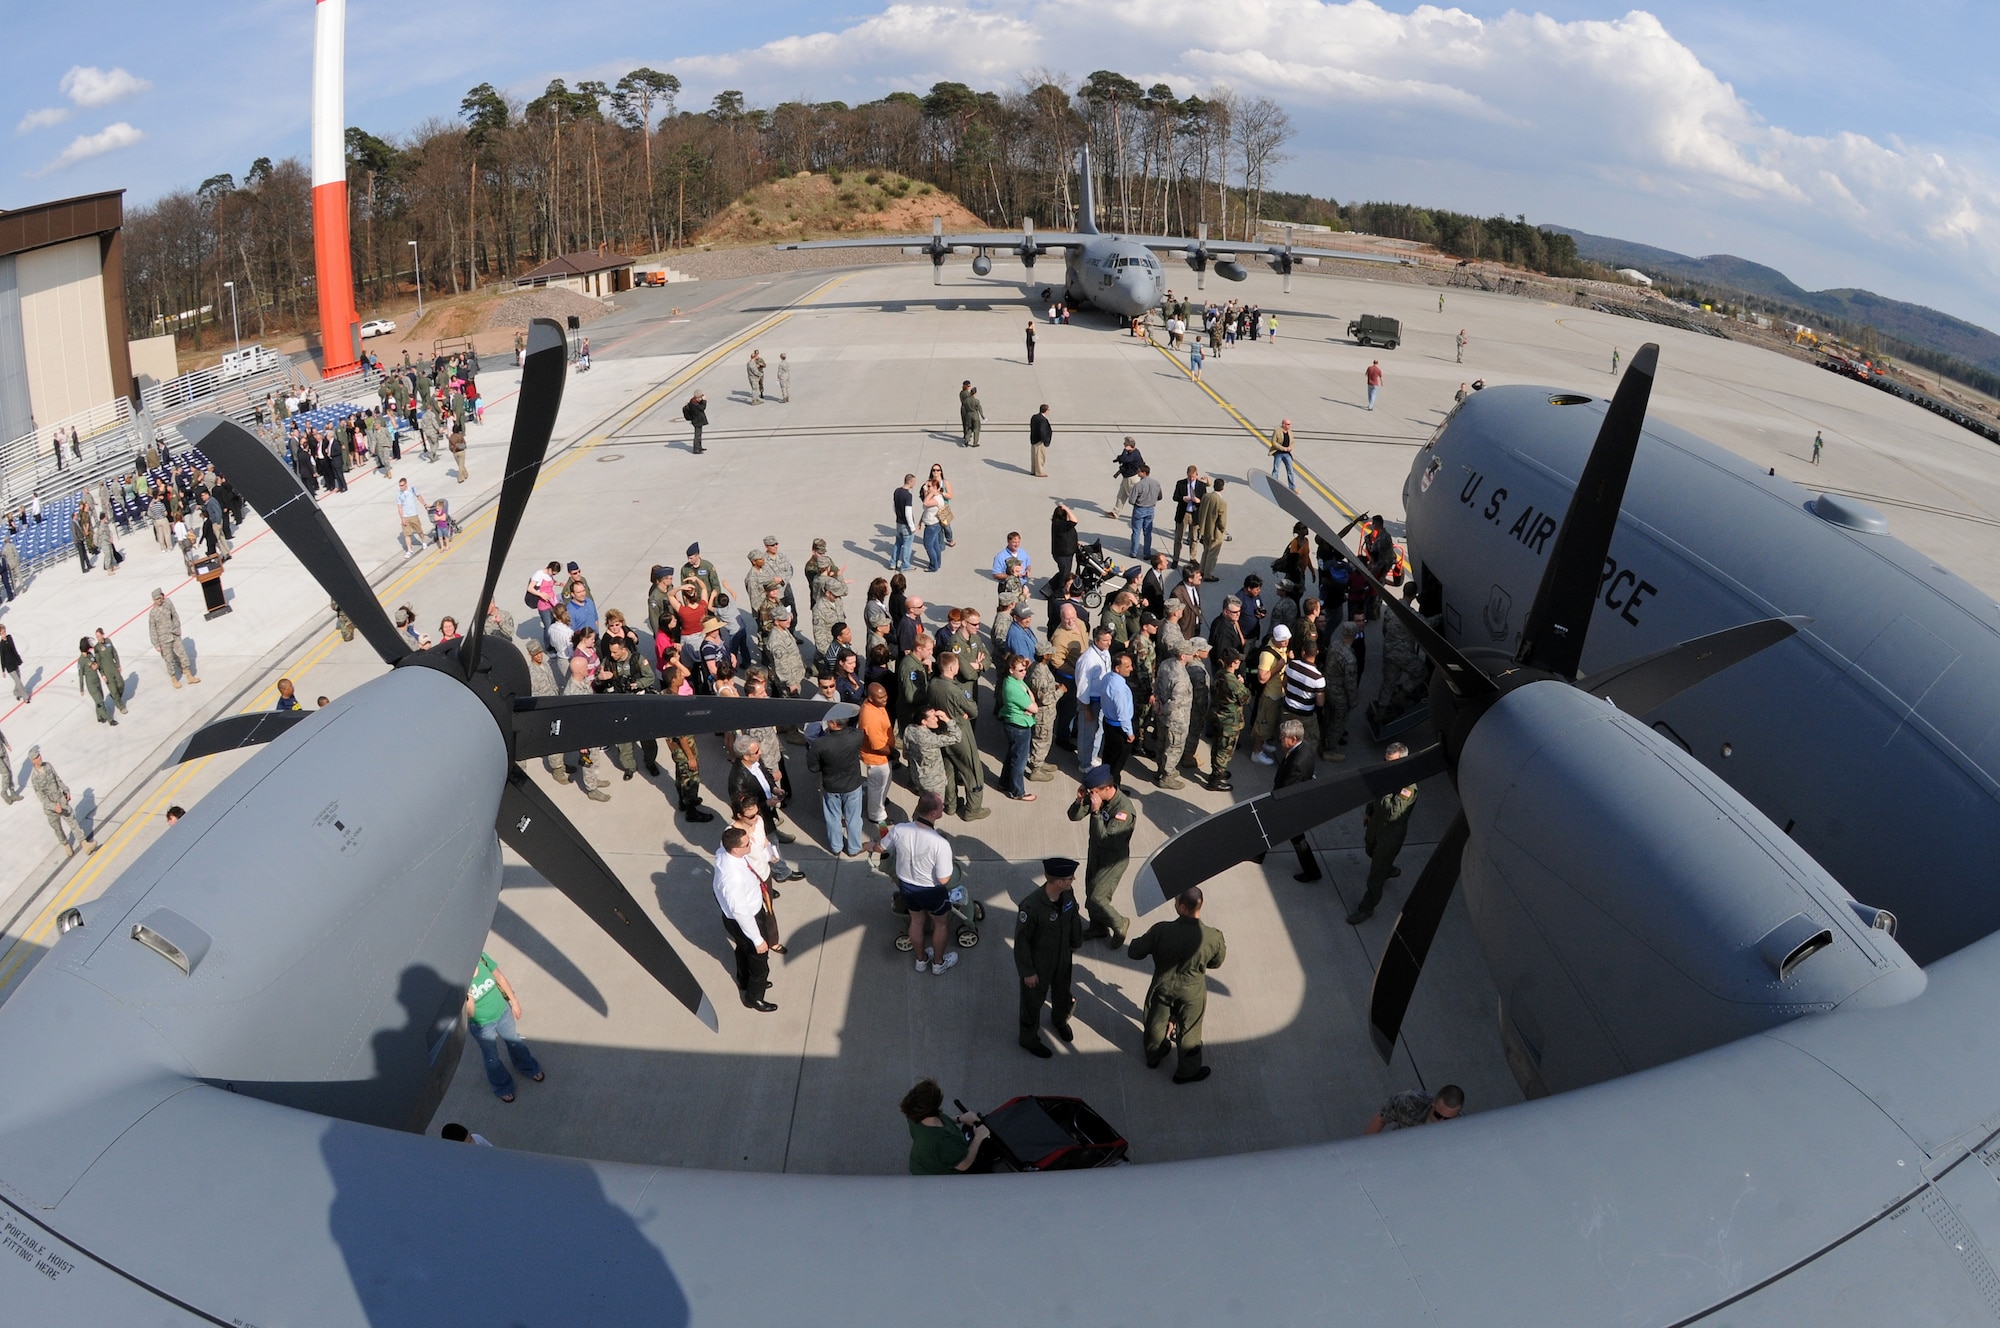 Members from all over the Kaiserslautern Military Community wait to take a tour of Ramstein Air Base's newest aircraft, a C-130J, during a celebration ceremony held April 7. The J-model landed on Ramstein for the first time during a ceremony today held to not only honor the arrival of the new aircraft, but also a new era in operations for the 86th Airlift Wing. The ceremony also included a ribbon cutting for a new 68,000 square feet dual-bay maintenance hangar, which can hold two C-130J aircraft or one C-17.  (U.S. Air Force photo by Airman 1st Class Grovert Fuentes-Contreras)